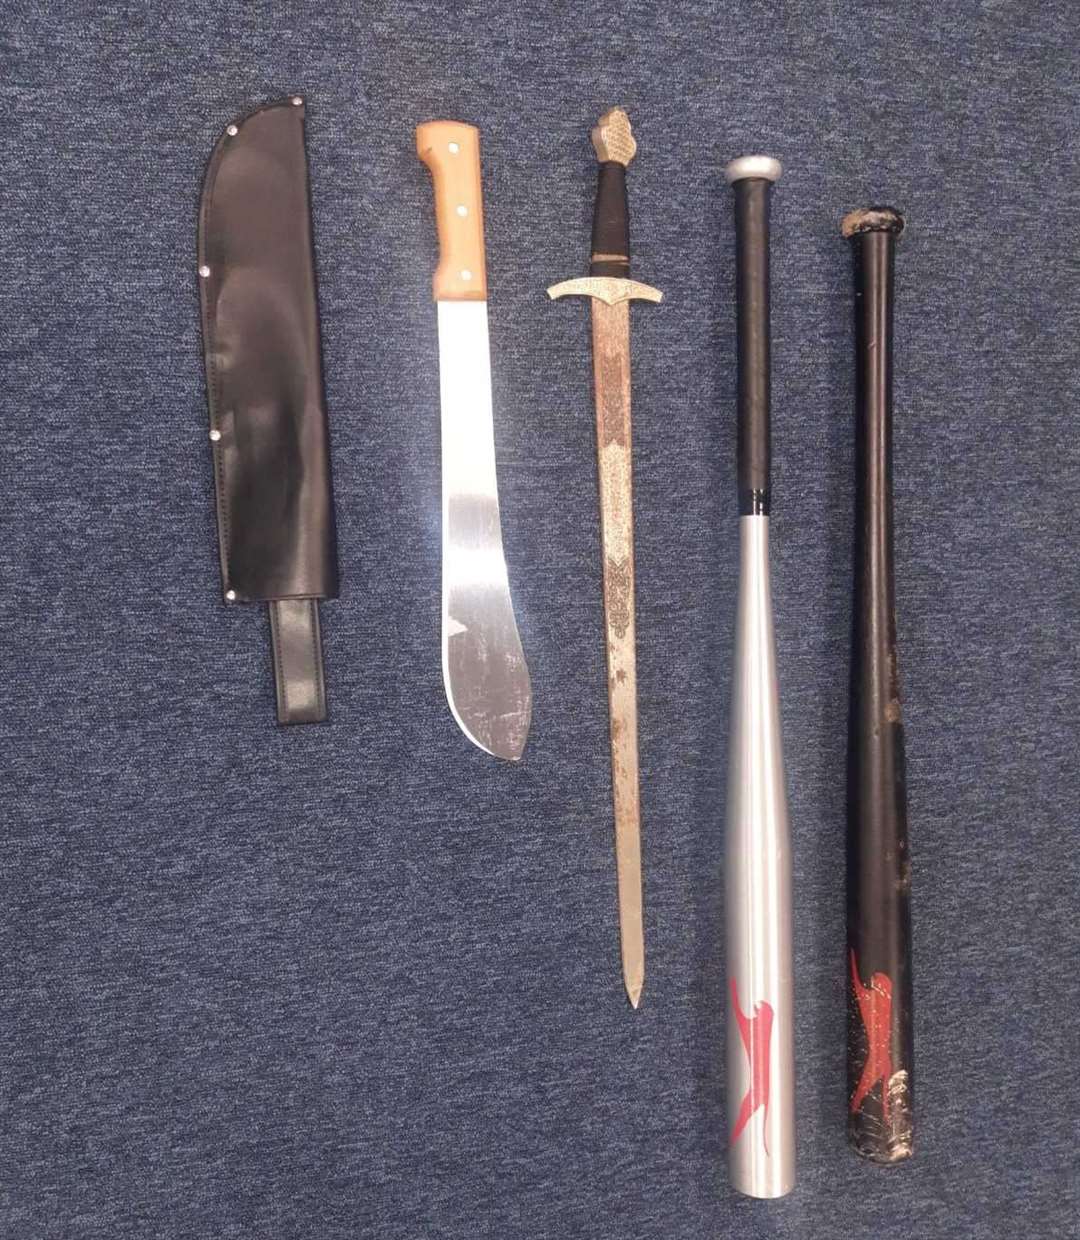 Weapons seized by The Met Police following reports of a stabbing. Picture: Twitter / @MPSBromley